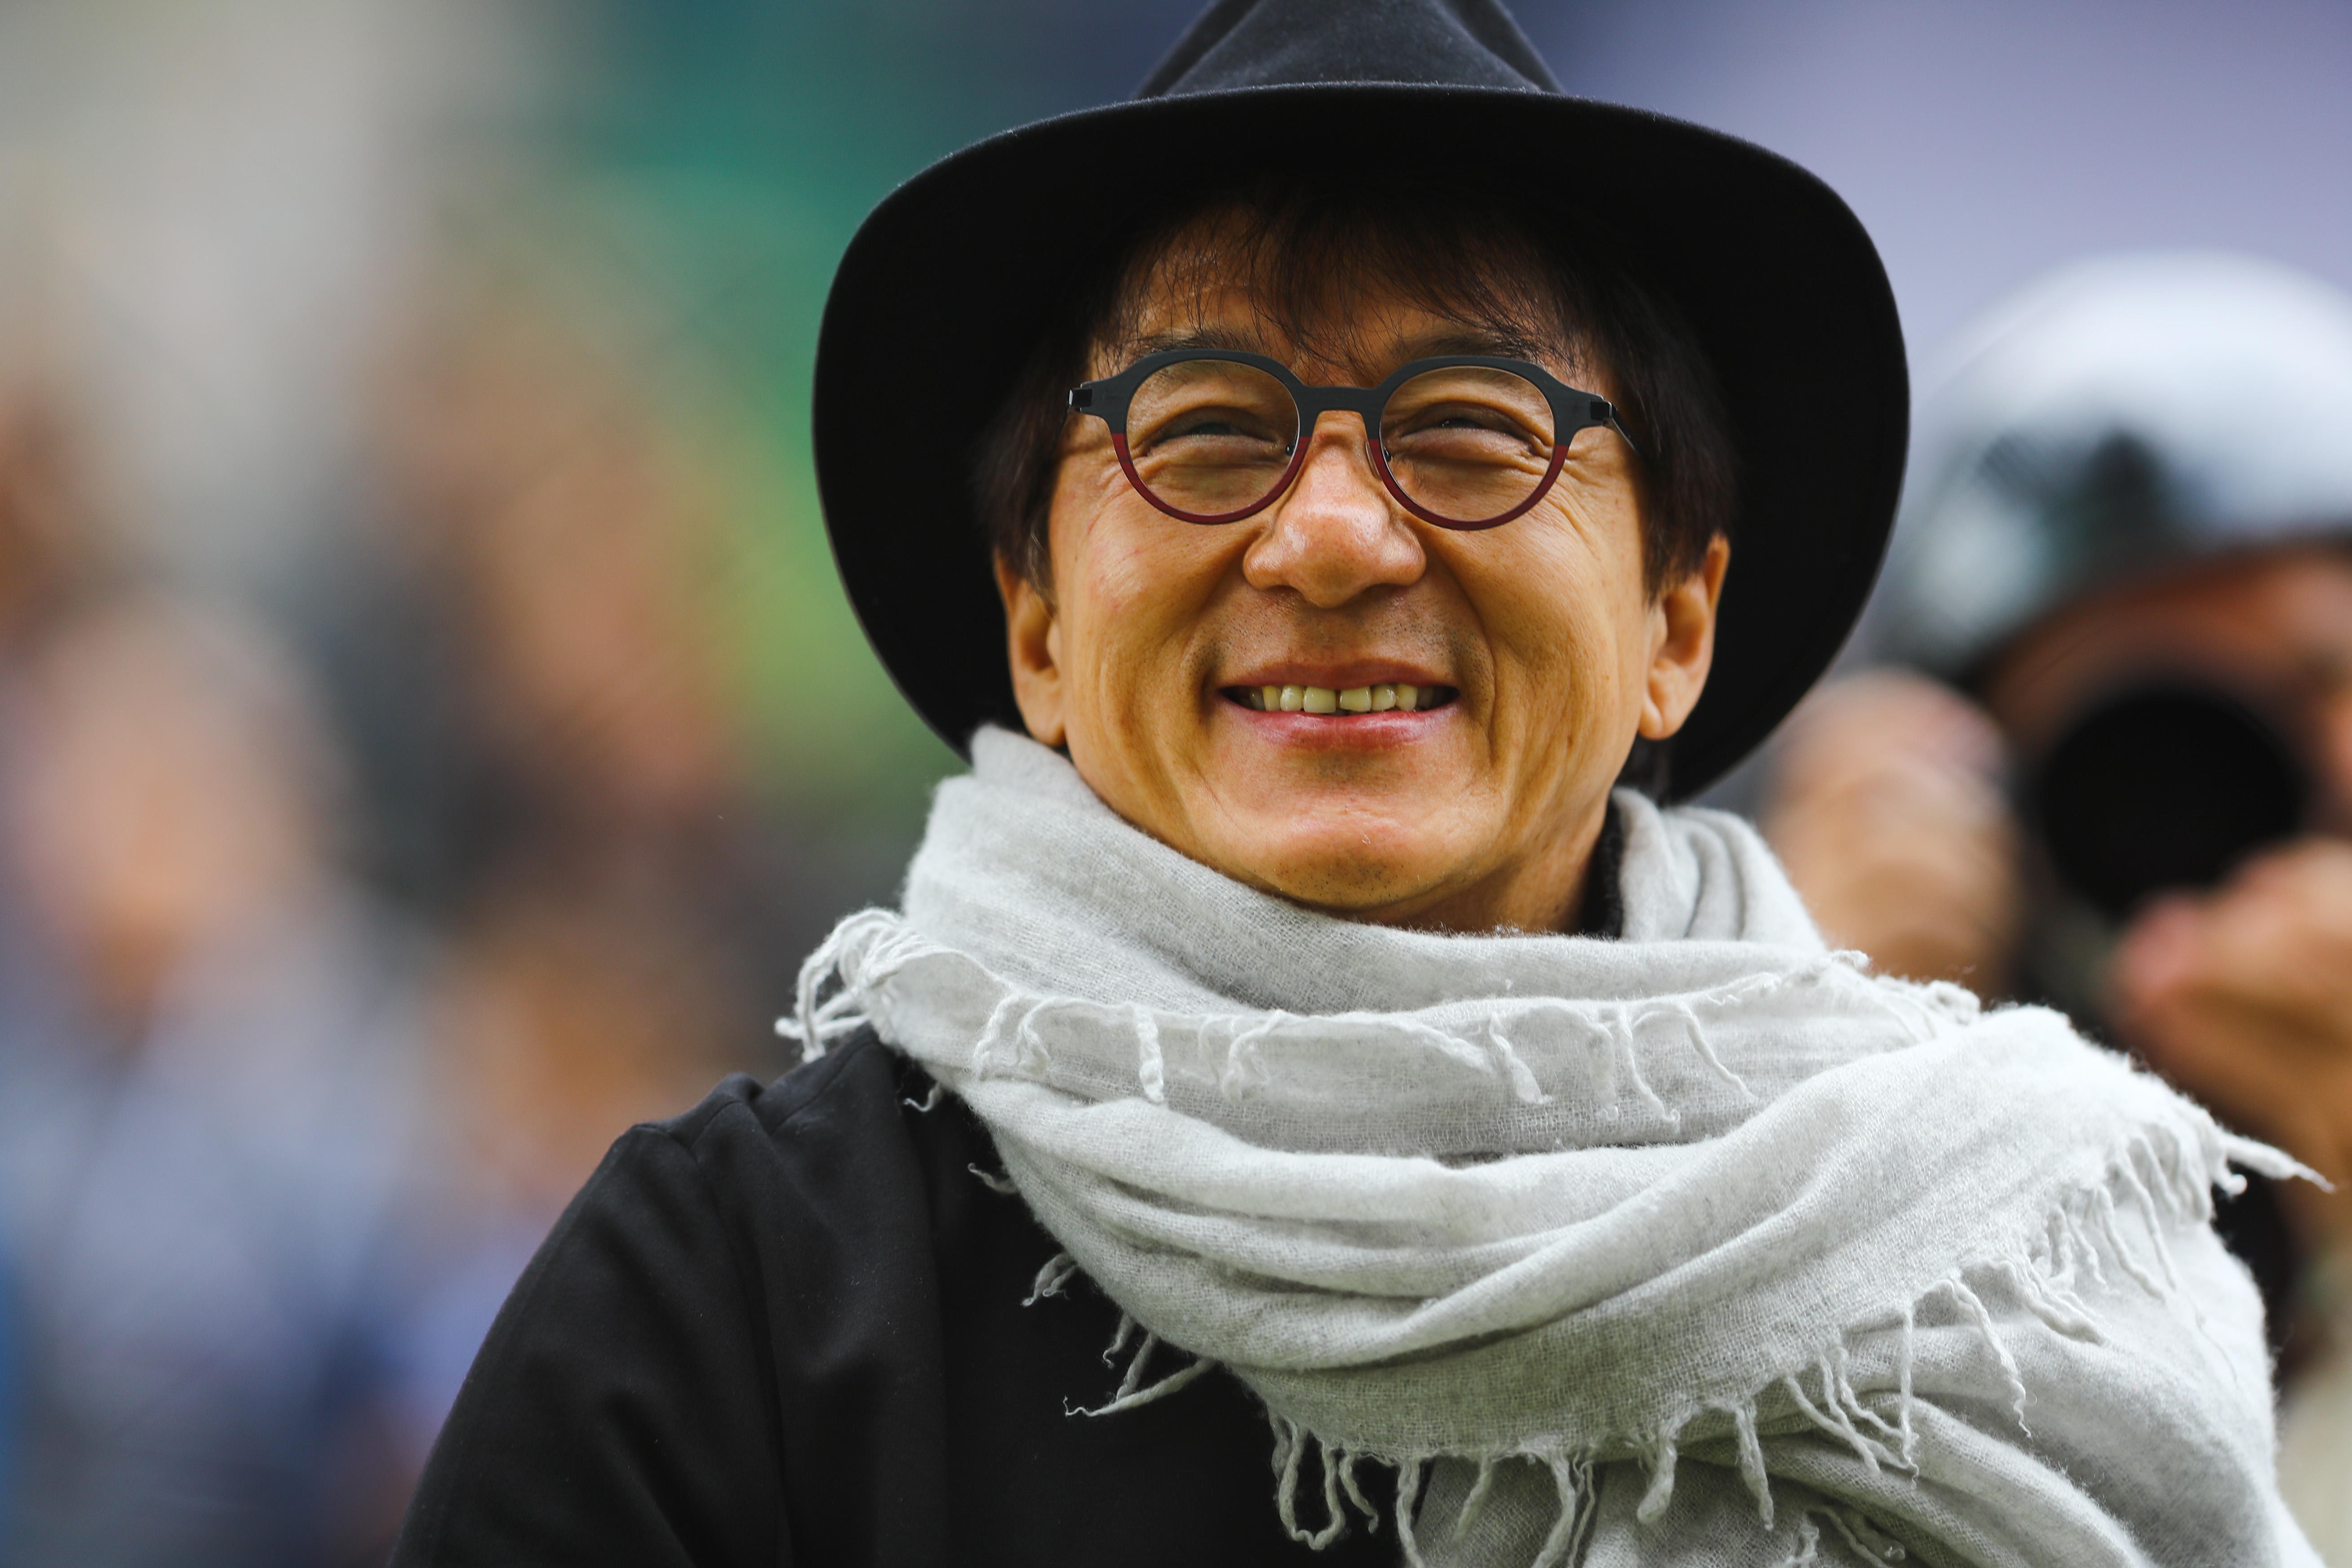 Jackie Chan in Shanghai, China, in November 2017. Picture: Alamy